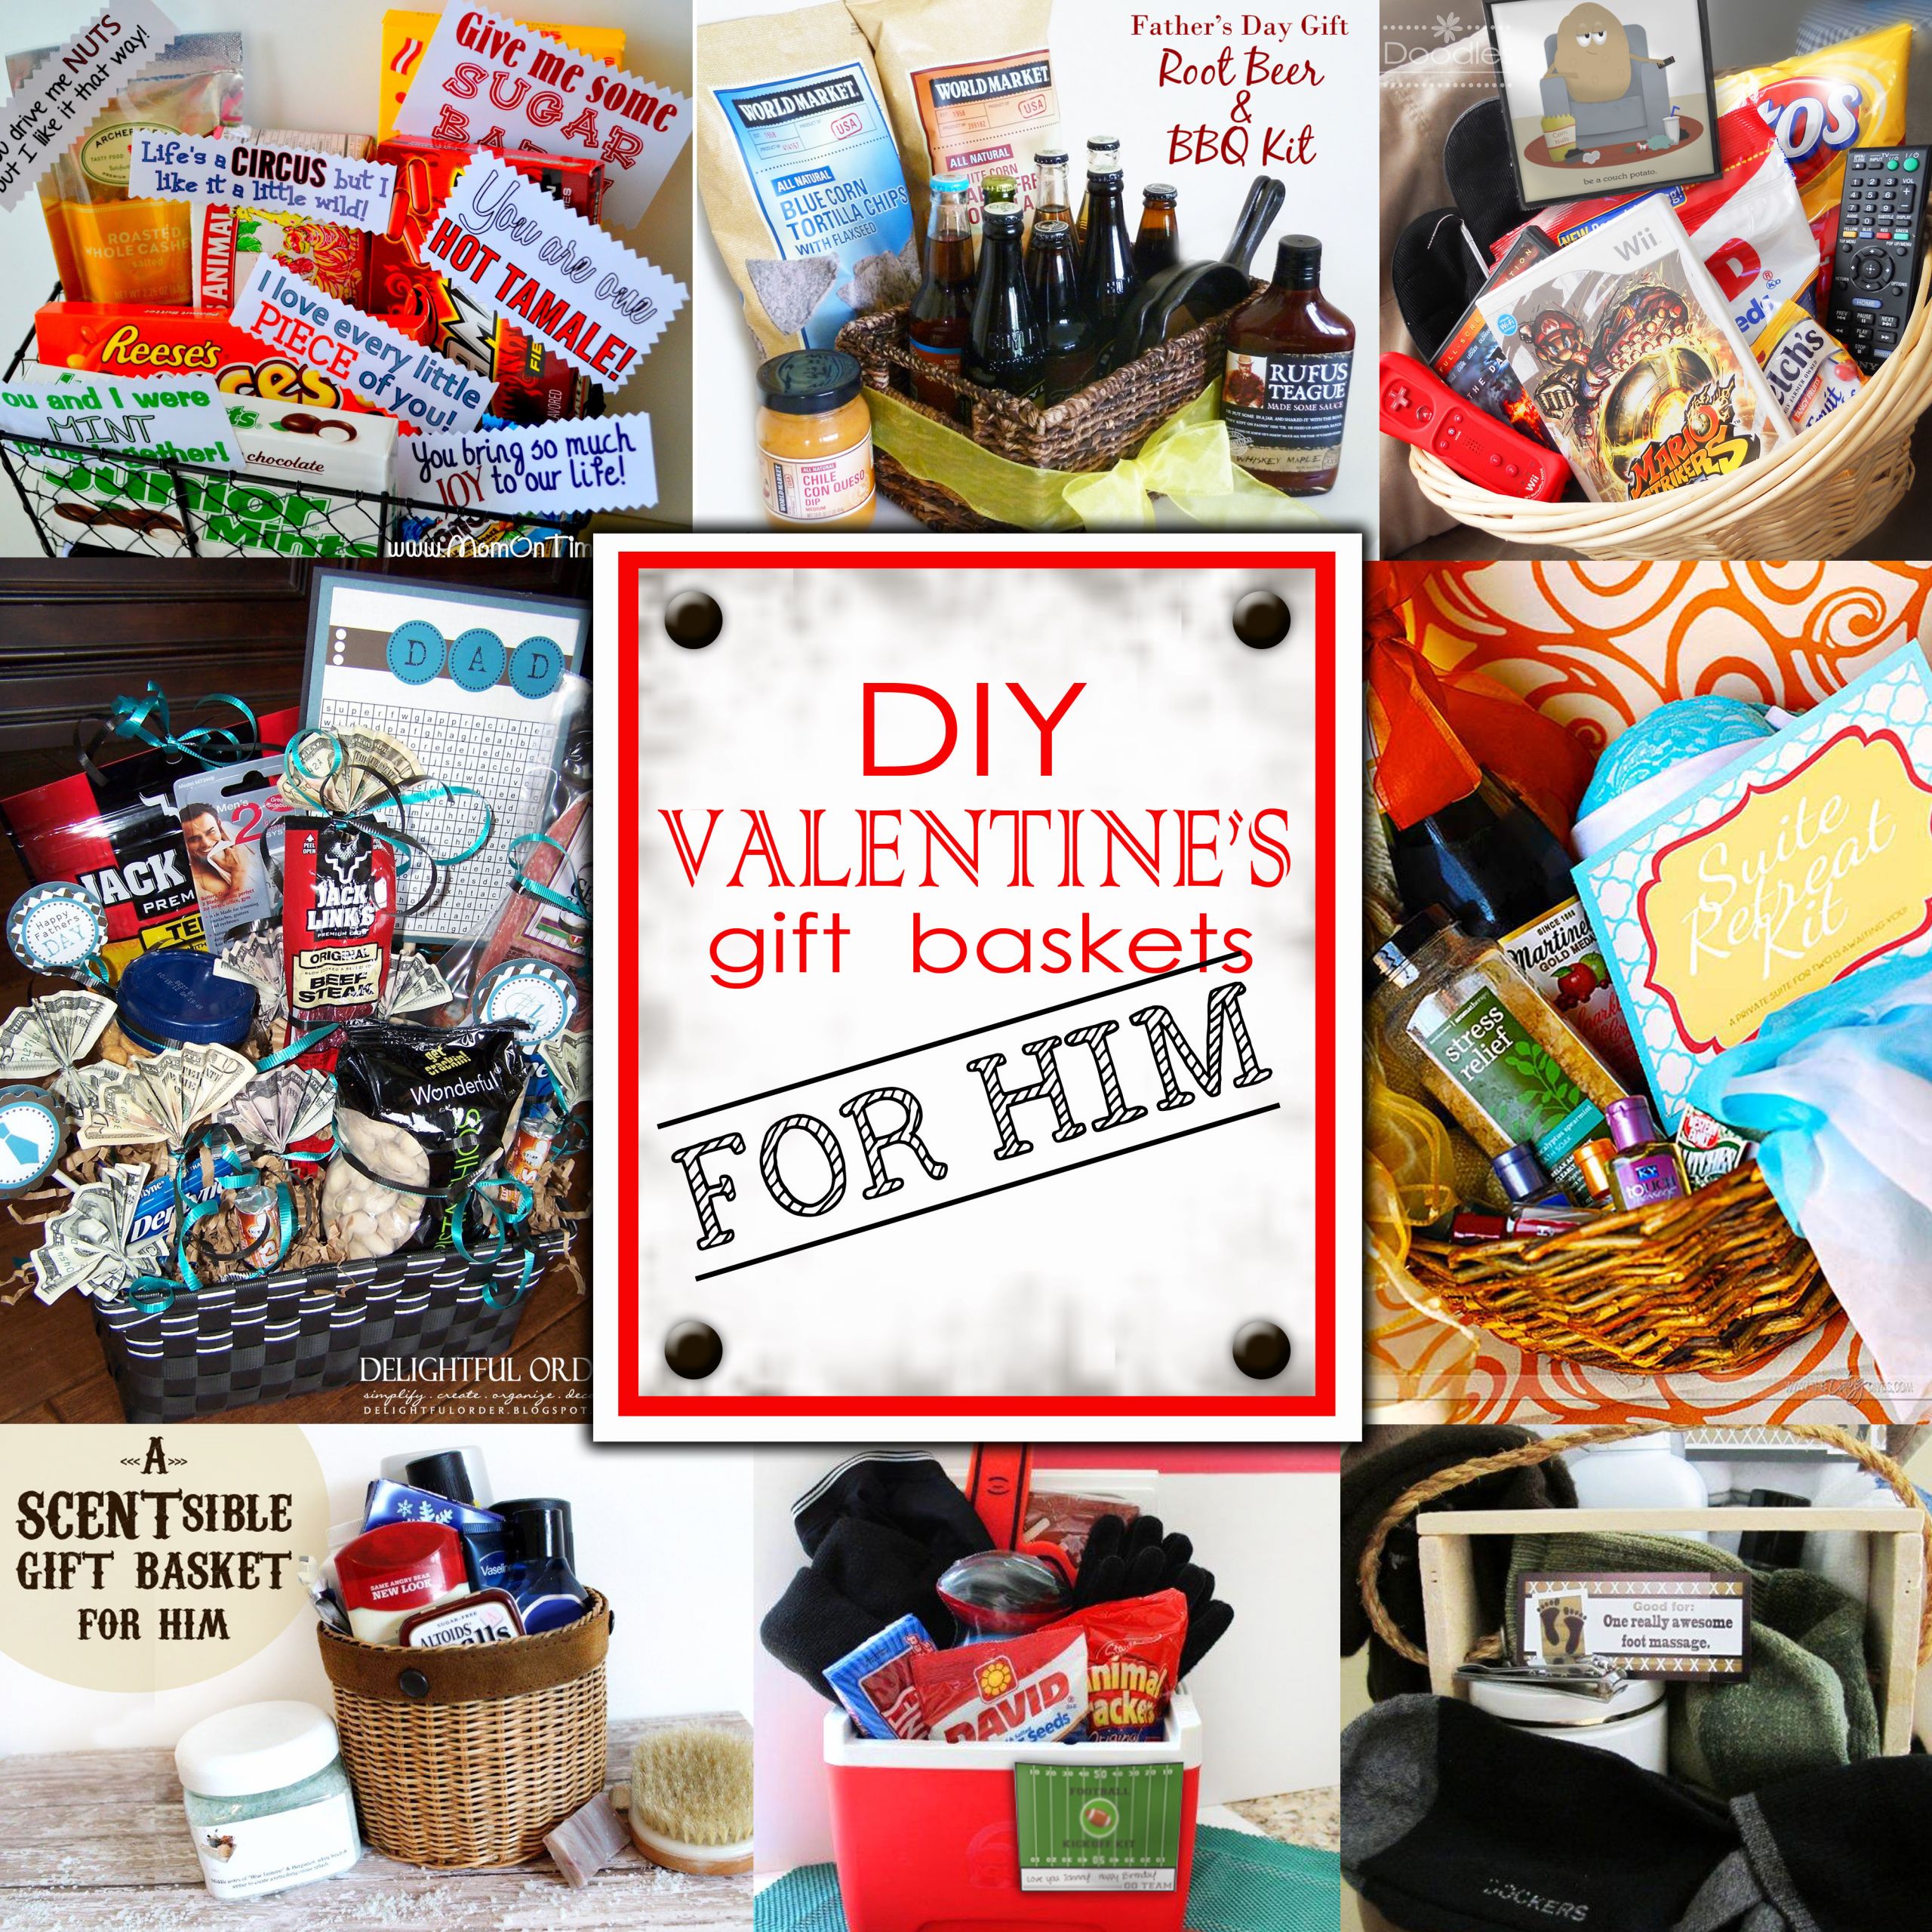 Gift Ideas Valentines Day Him Inspirational Diy Valentine S Day Gift Baskets for Him Darling Doodles